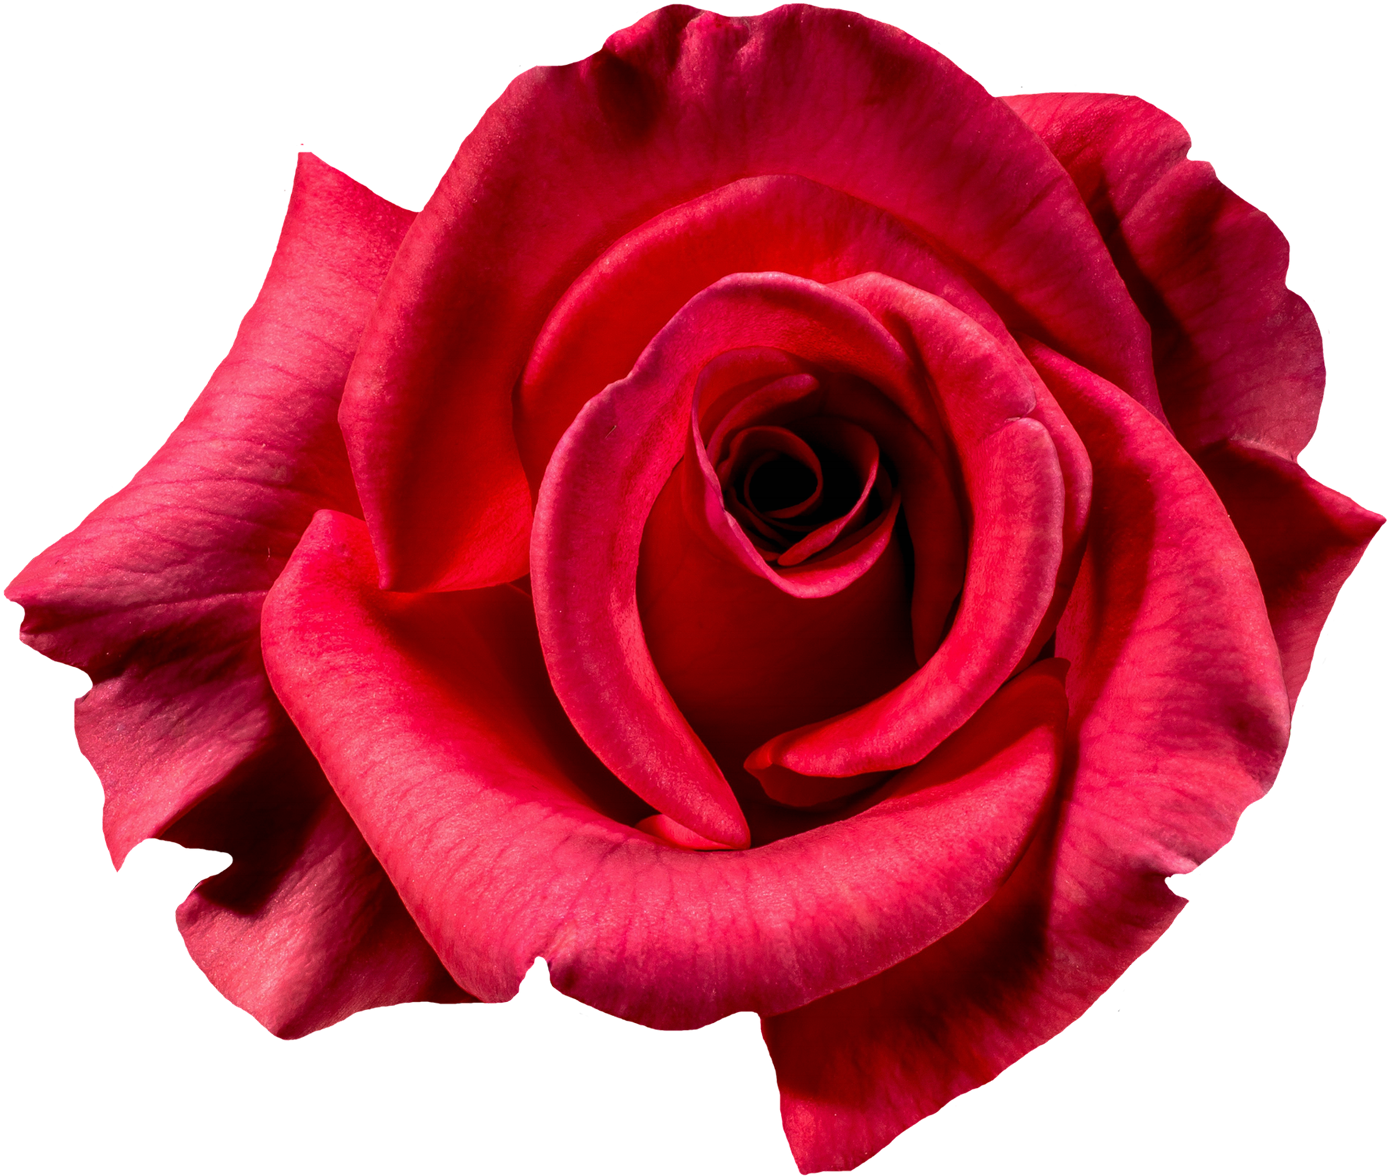 Rose Picture Flowers - Flower Top View Png (1500x1284)